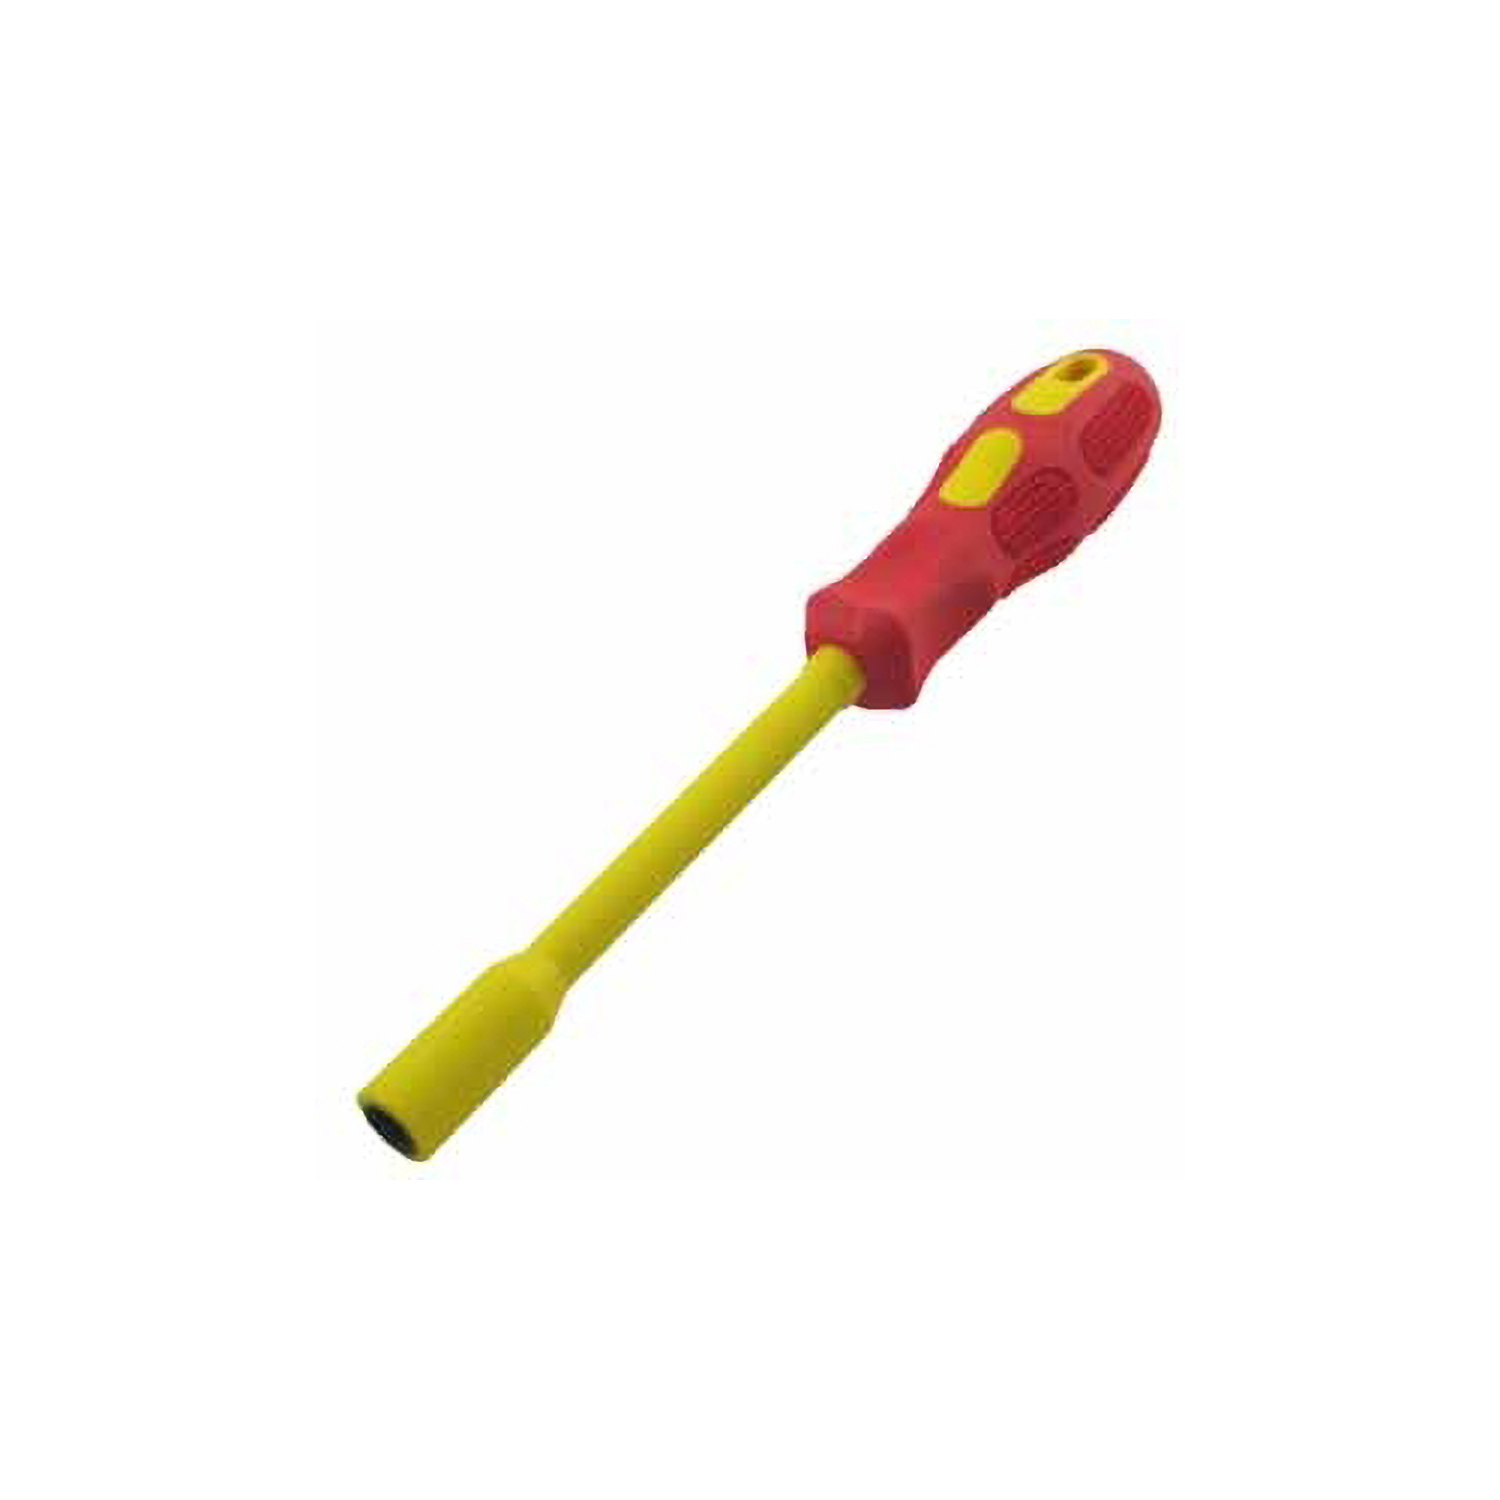 3/8" Insulated Nut Driver